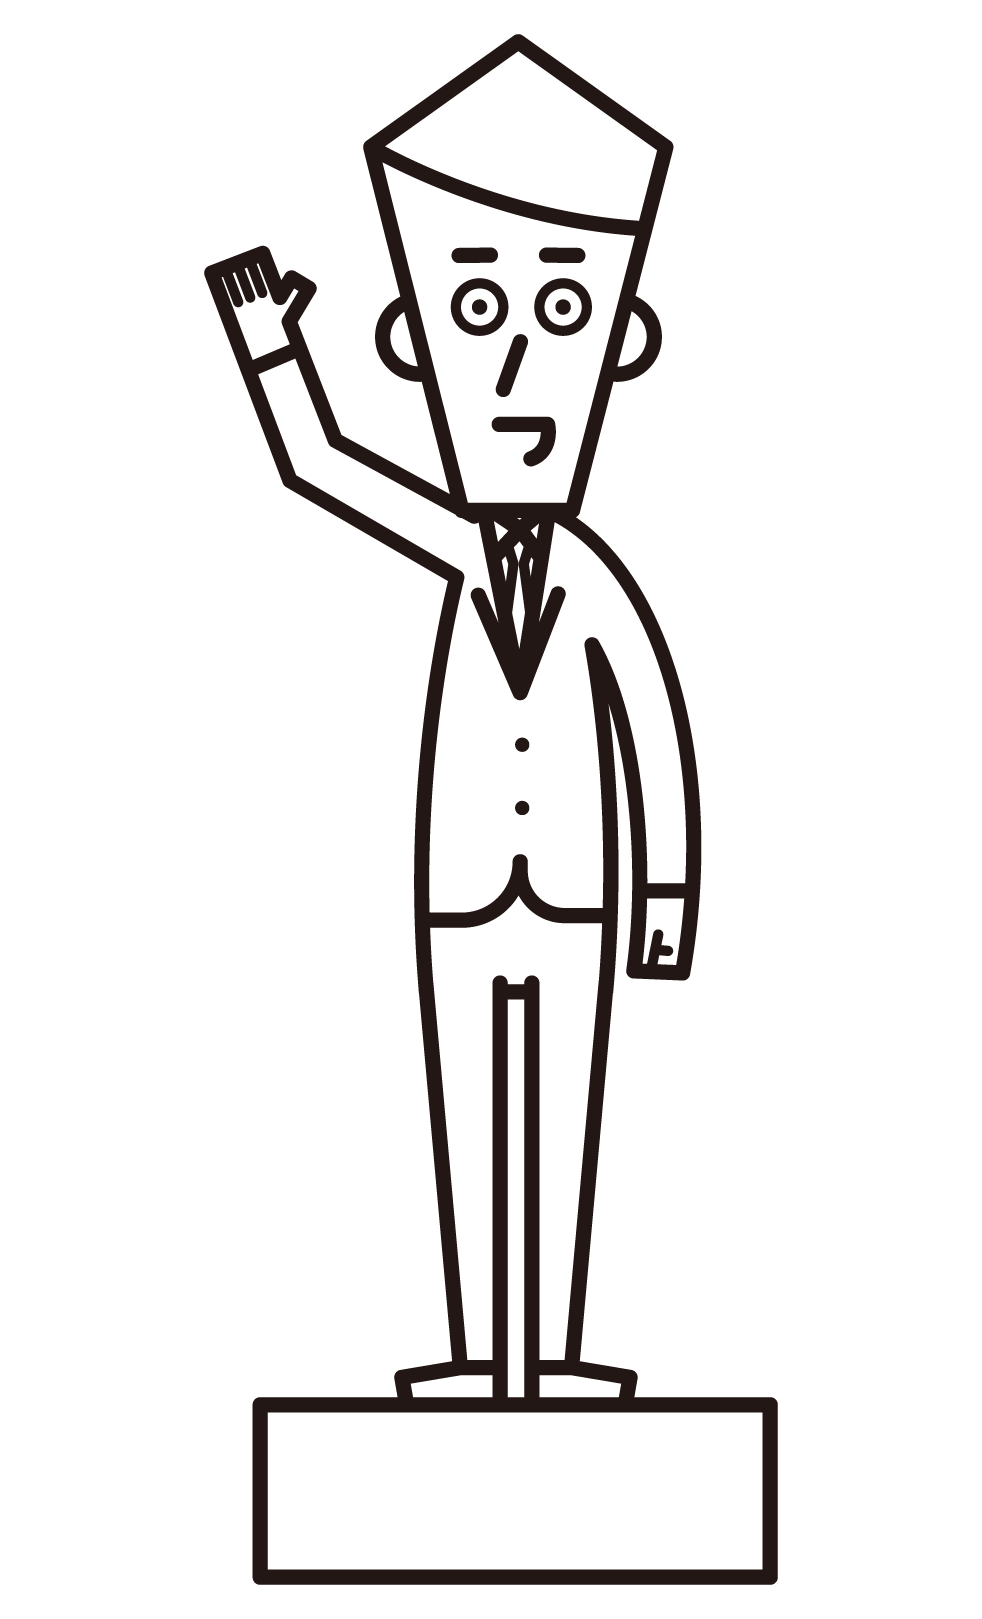 Illustration of a politician (male) waving his hand